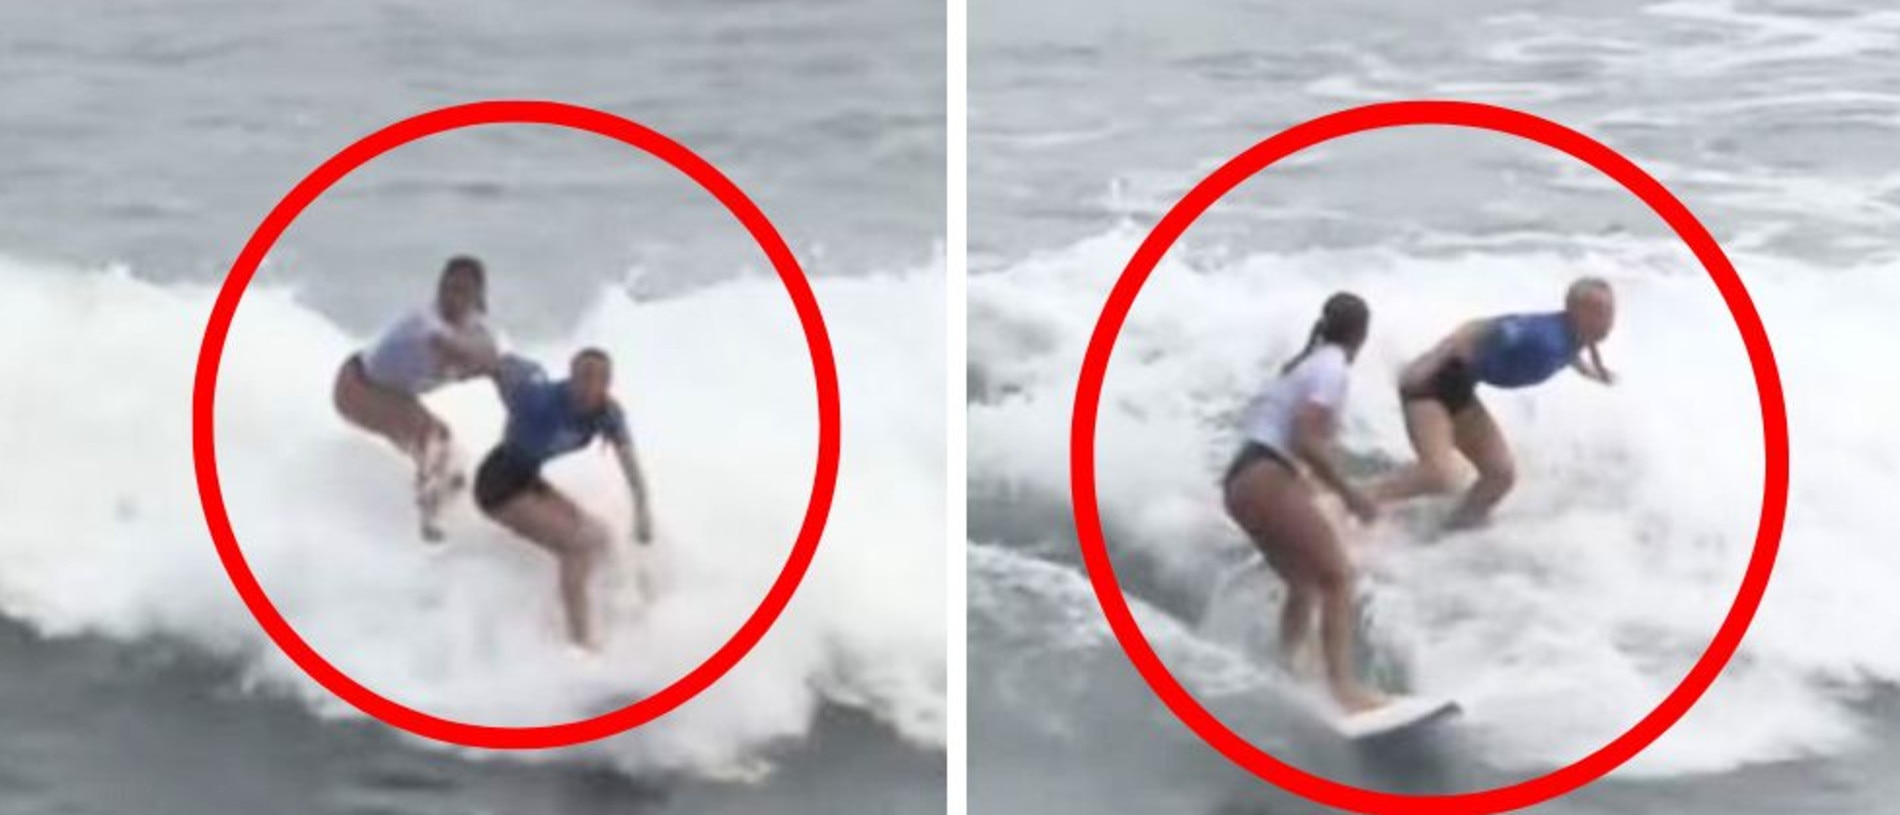 A rival surfer tries to push Aussie Willow Ryder off her board.